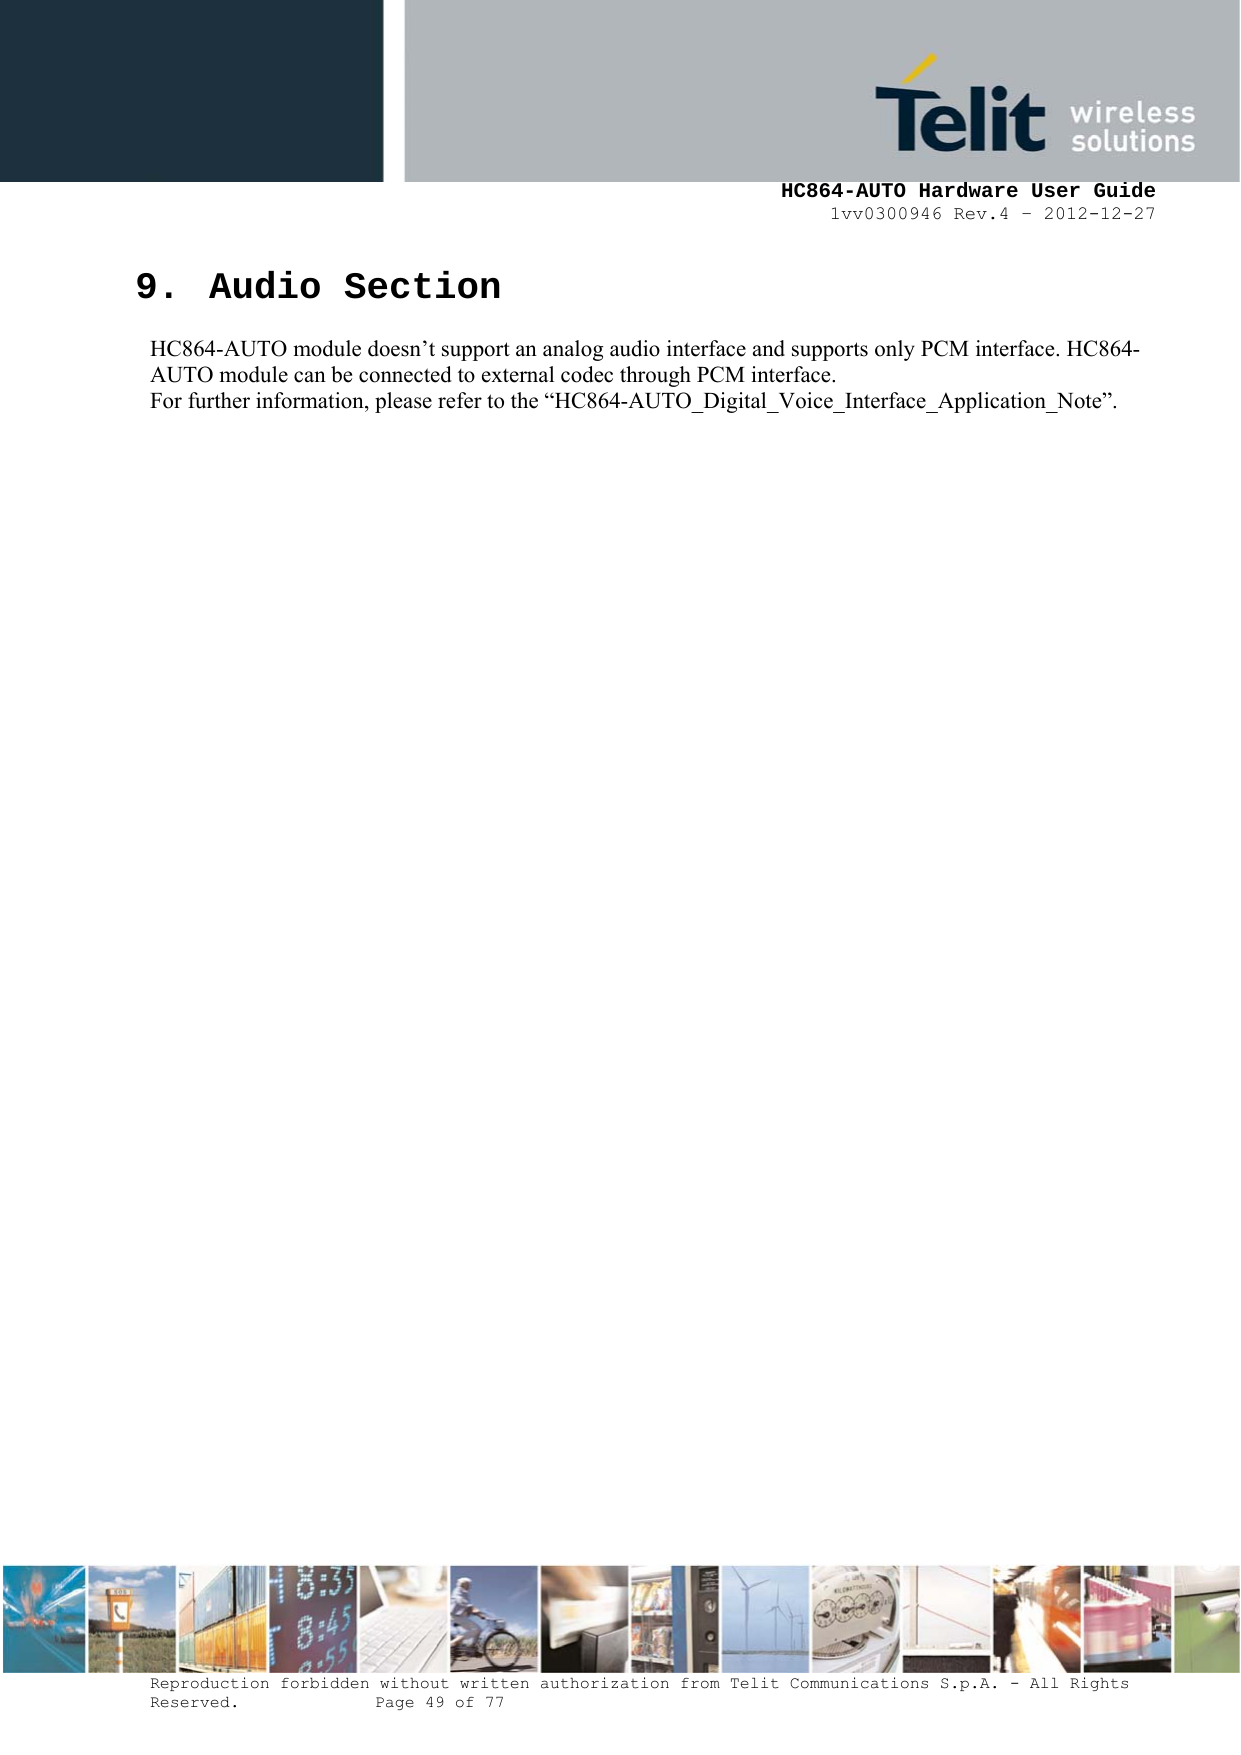     HC864-AUTO Hardware User Guide 1vv0300946 Rev.4 – 2012-12-27 Reproduction forbidden without written authorization from Telit Communications S.p.A. - All Rights Reserved.    Page 49 of 77  9. Audio Section HC864-AUTO module doesn’t support an analog audio interface and supports only PCM interface. HC864-AUTO module can be connected to external codec through PCM interface. For further information, please refer to the “HC864-AUTO_Digital_Voice_Interface_Application_Note”. 